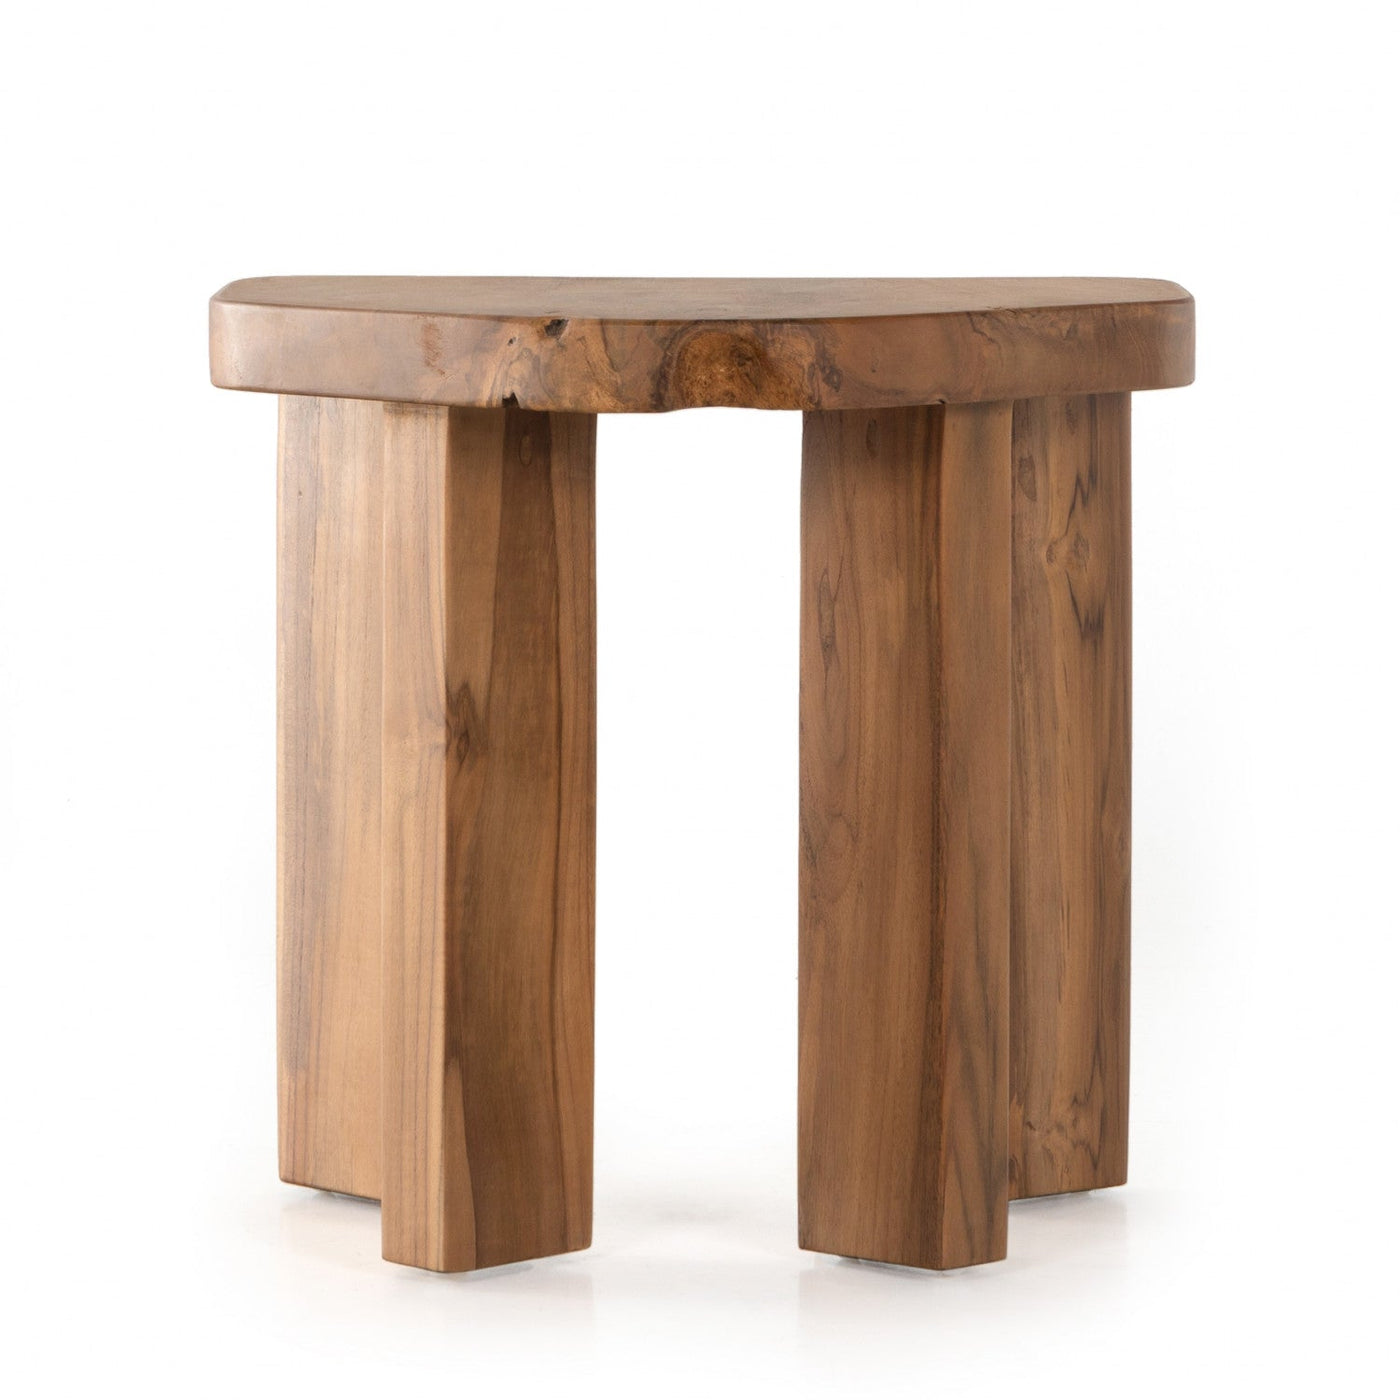 HAINES ACCENT STOOL-AGED NATURAL TEAK